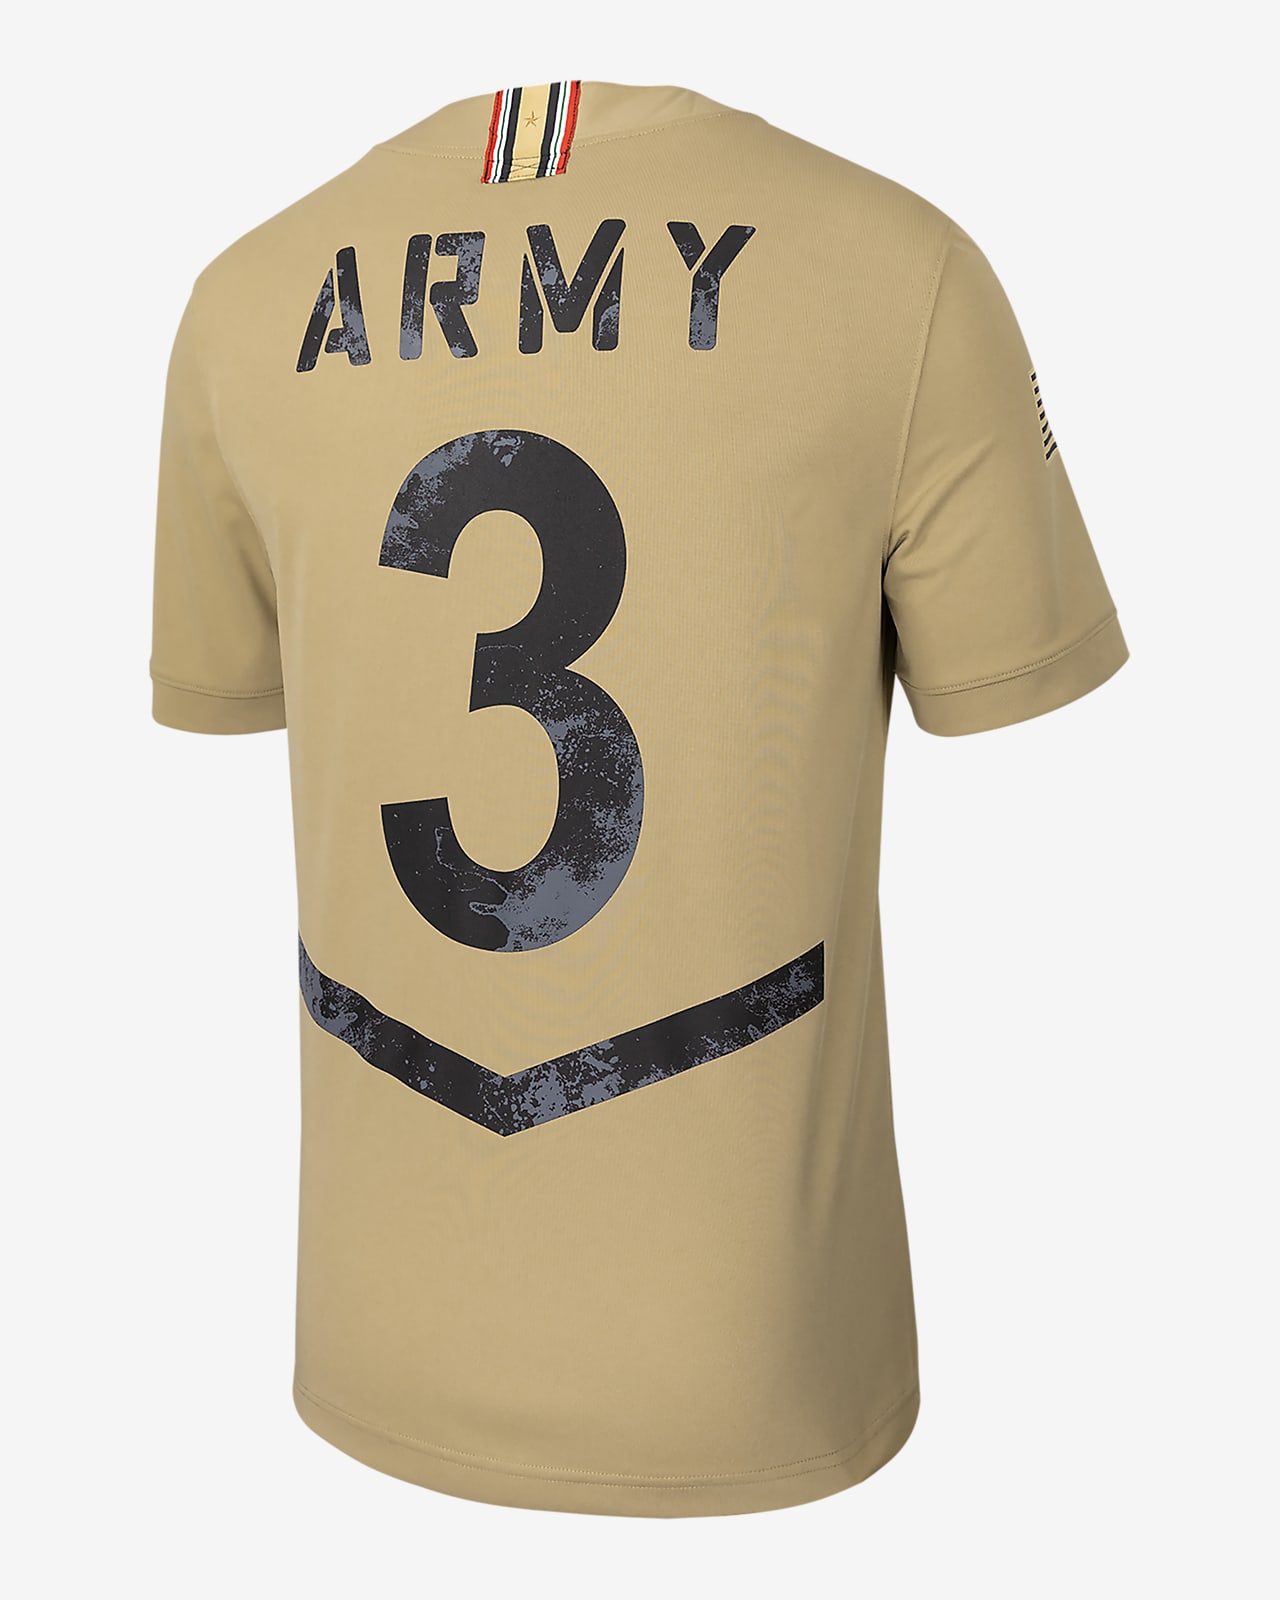 Army 2024 Men's Nike College Football Jersey.